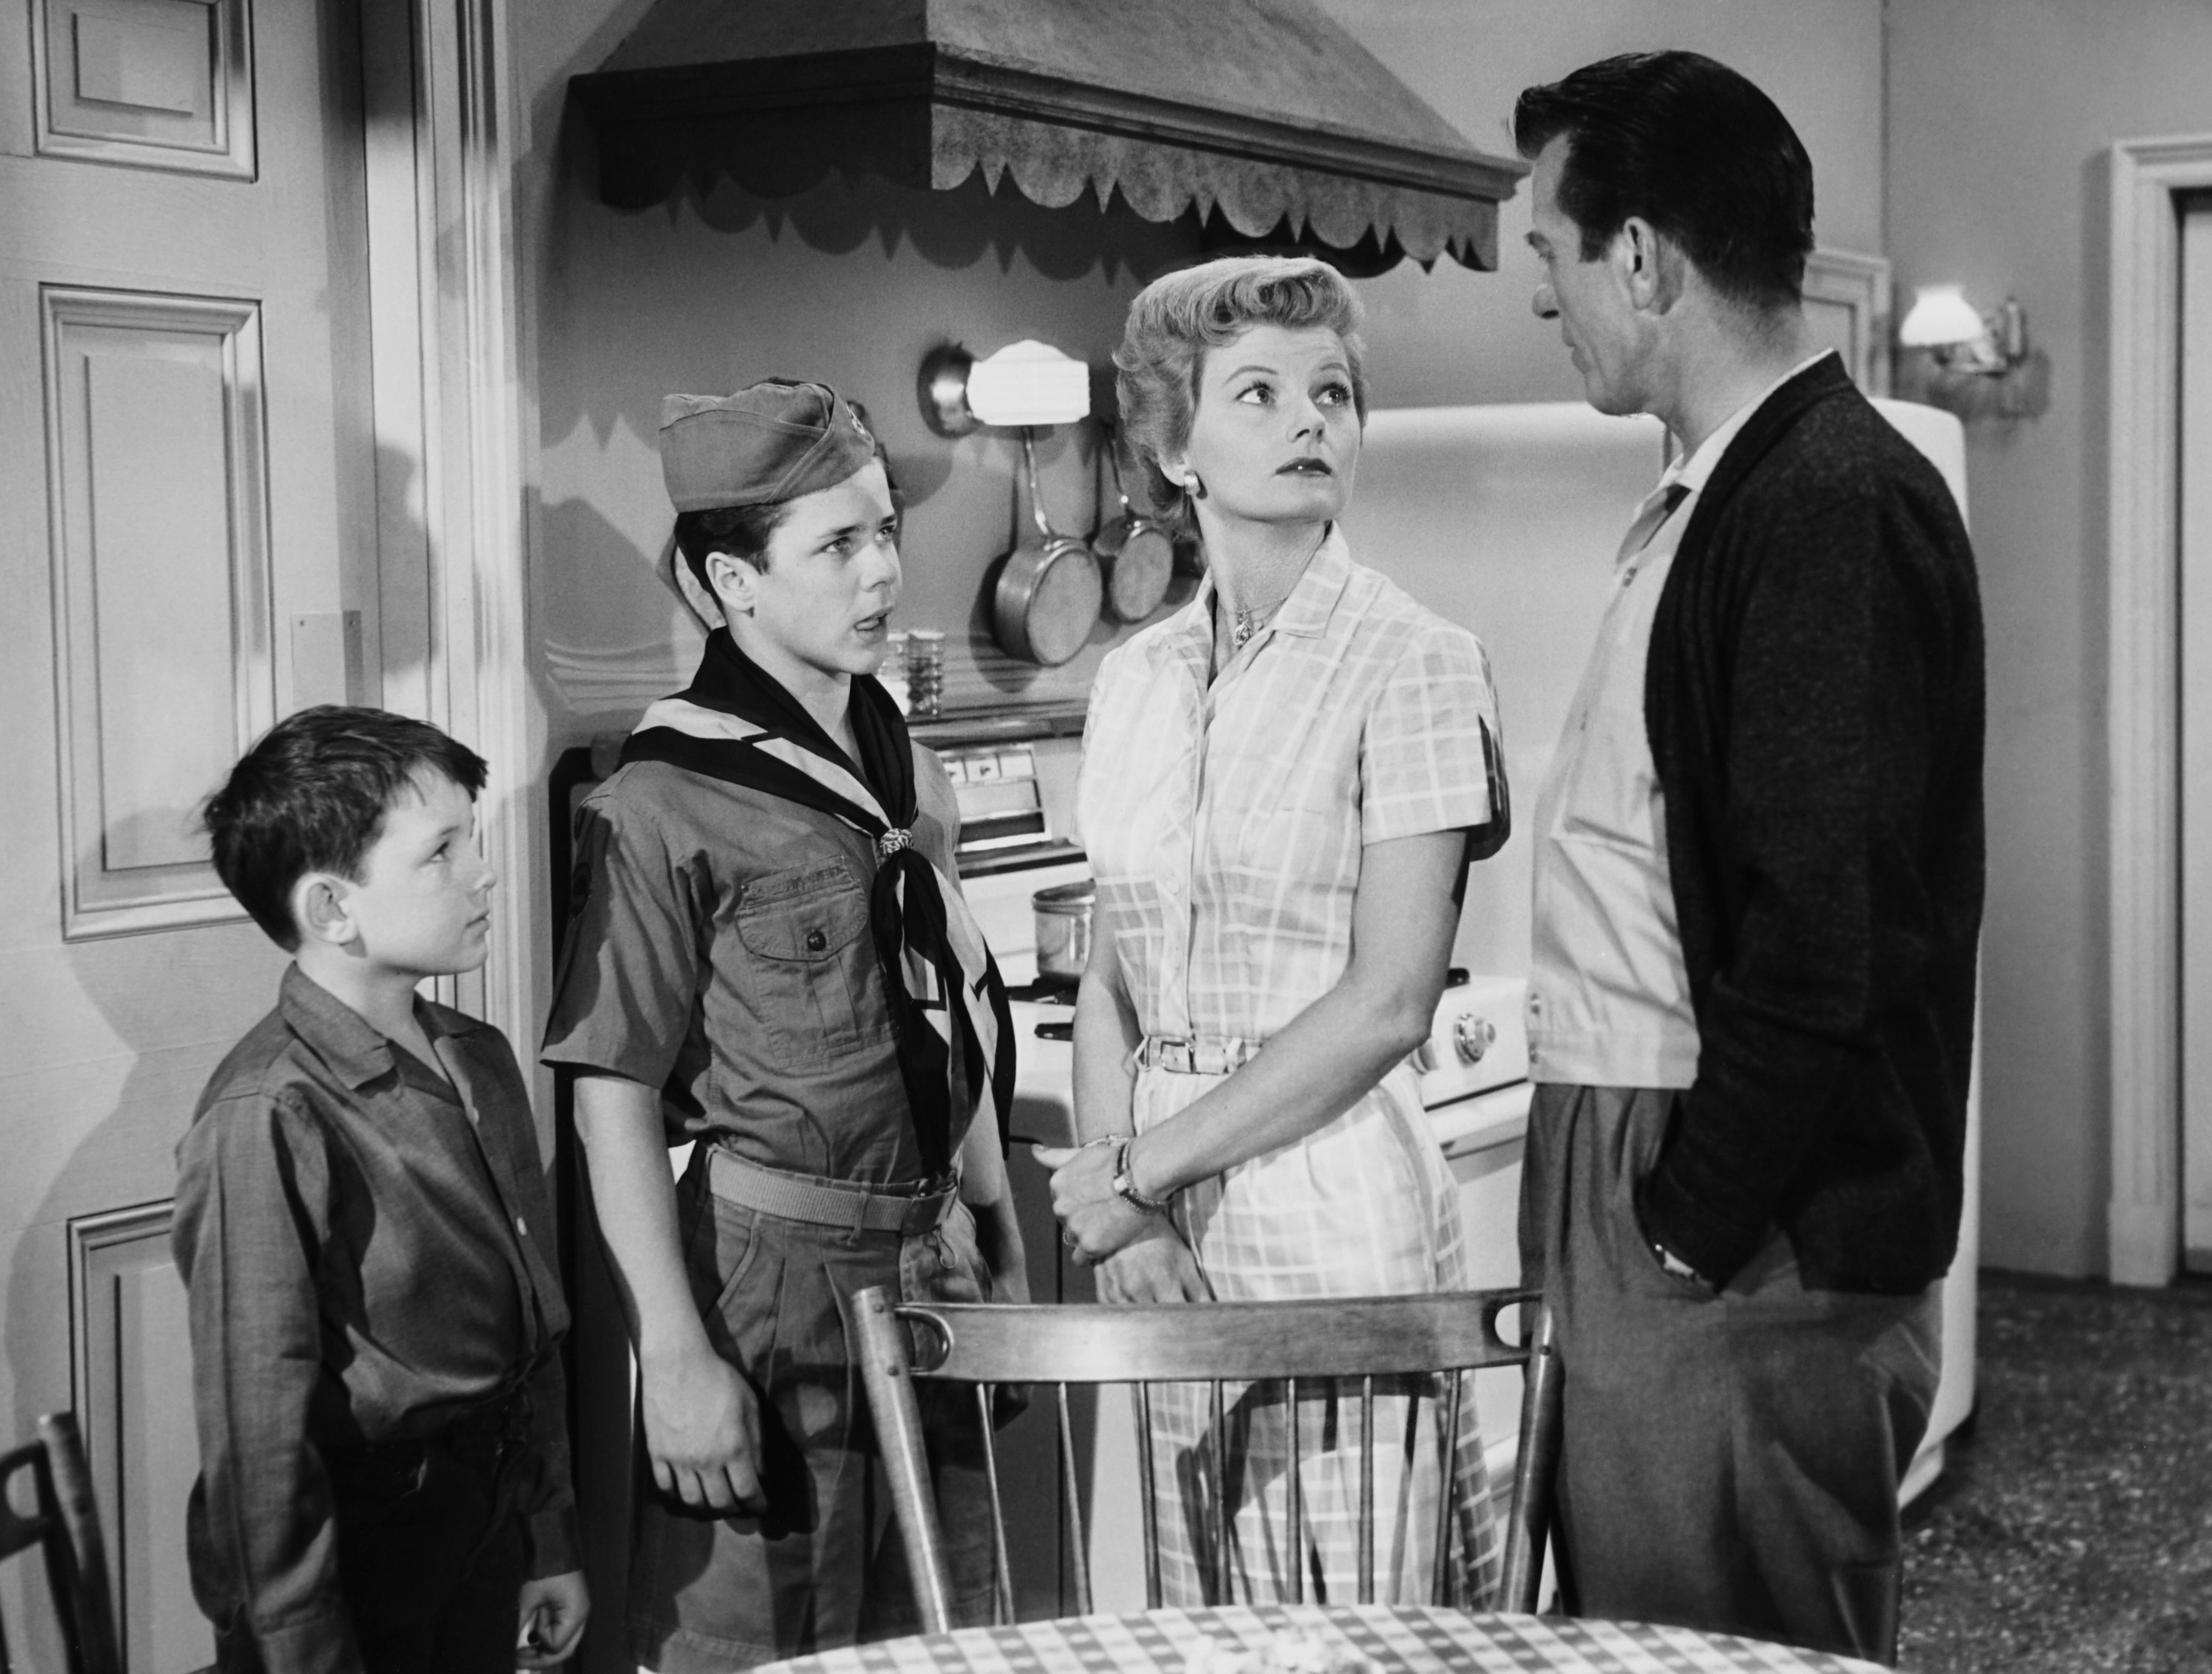 Jerry Mathers, Tony Dow, Barbara Billingsley, and Hugh Beaumont stand in the kitchen